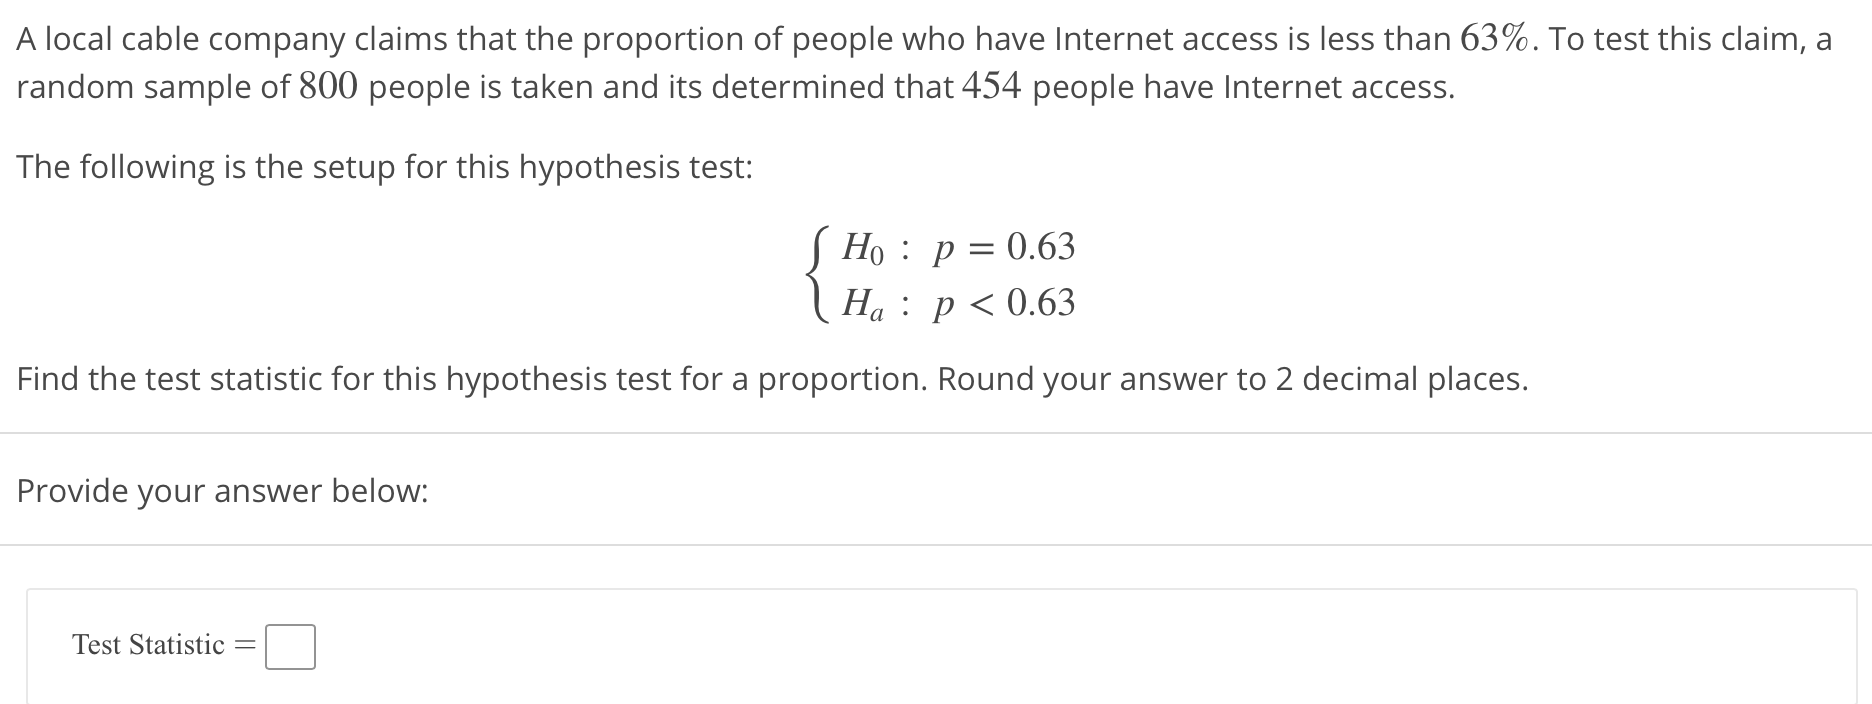 A local cable company claims that the proportion of people who have Internet access is less than 63%. To test this claim, a
random sample of 800 people is taken and its determined that 454 people have Internet acces:s.
The following is the setup for this hypothesis test:
Ho : p-0.63
Ha: p< 0.63
Find the test statistic for this hypothesis test for a proportion. Round your answer to 2 decimal places.
Provide your answer below:
Test Statistic
